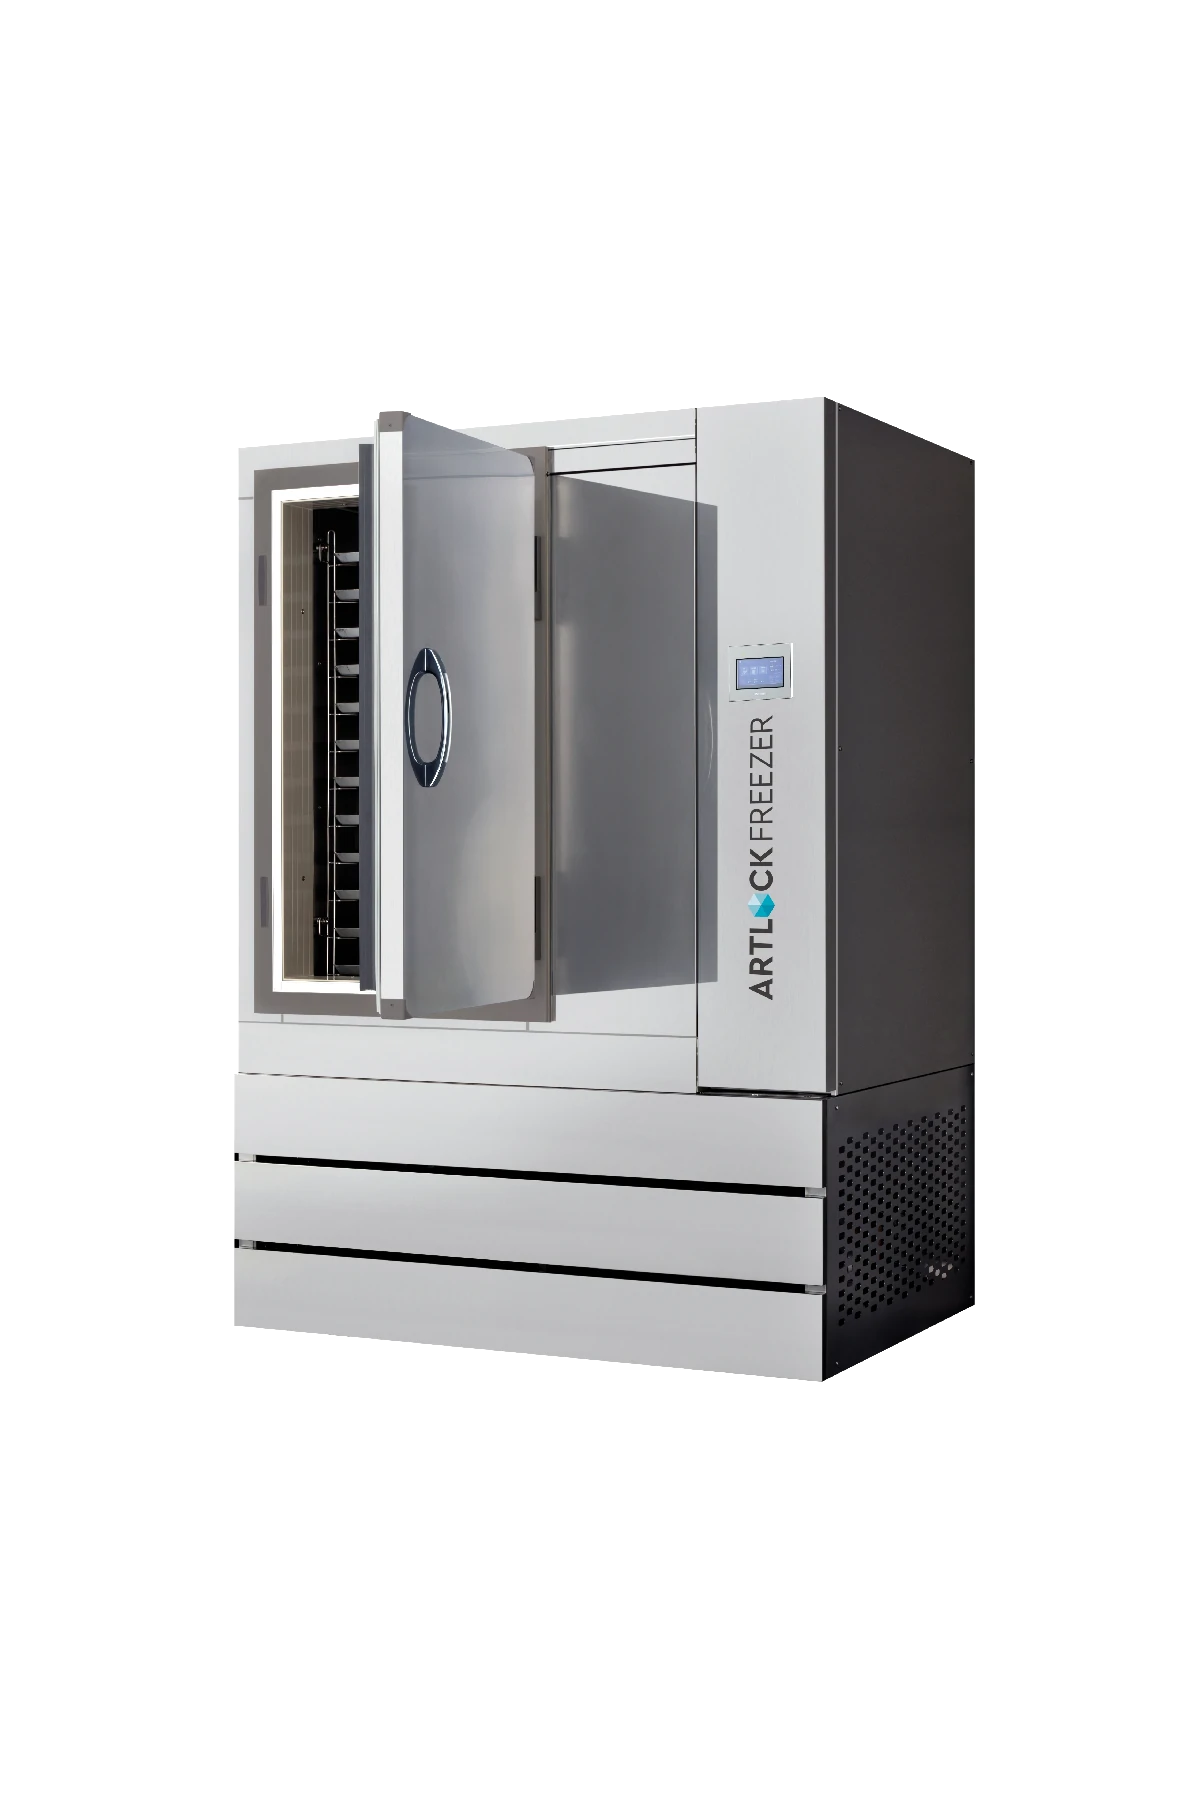 Image of our model ARF1650 commercial freezer which can freeze around 10 to 30 kg (22 to 70 lbs) per hour